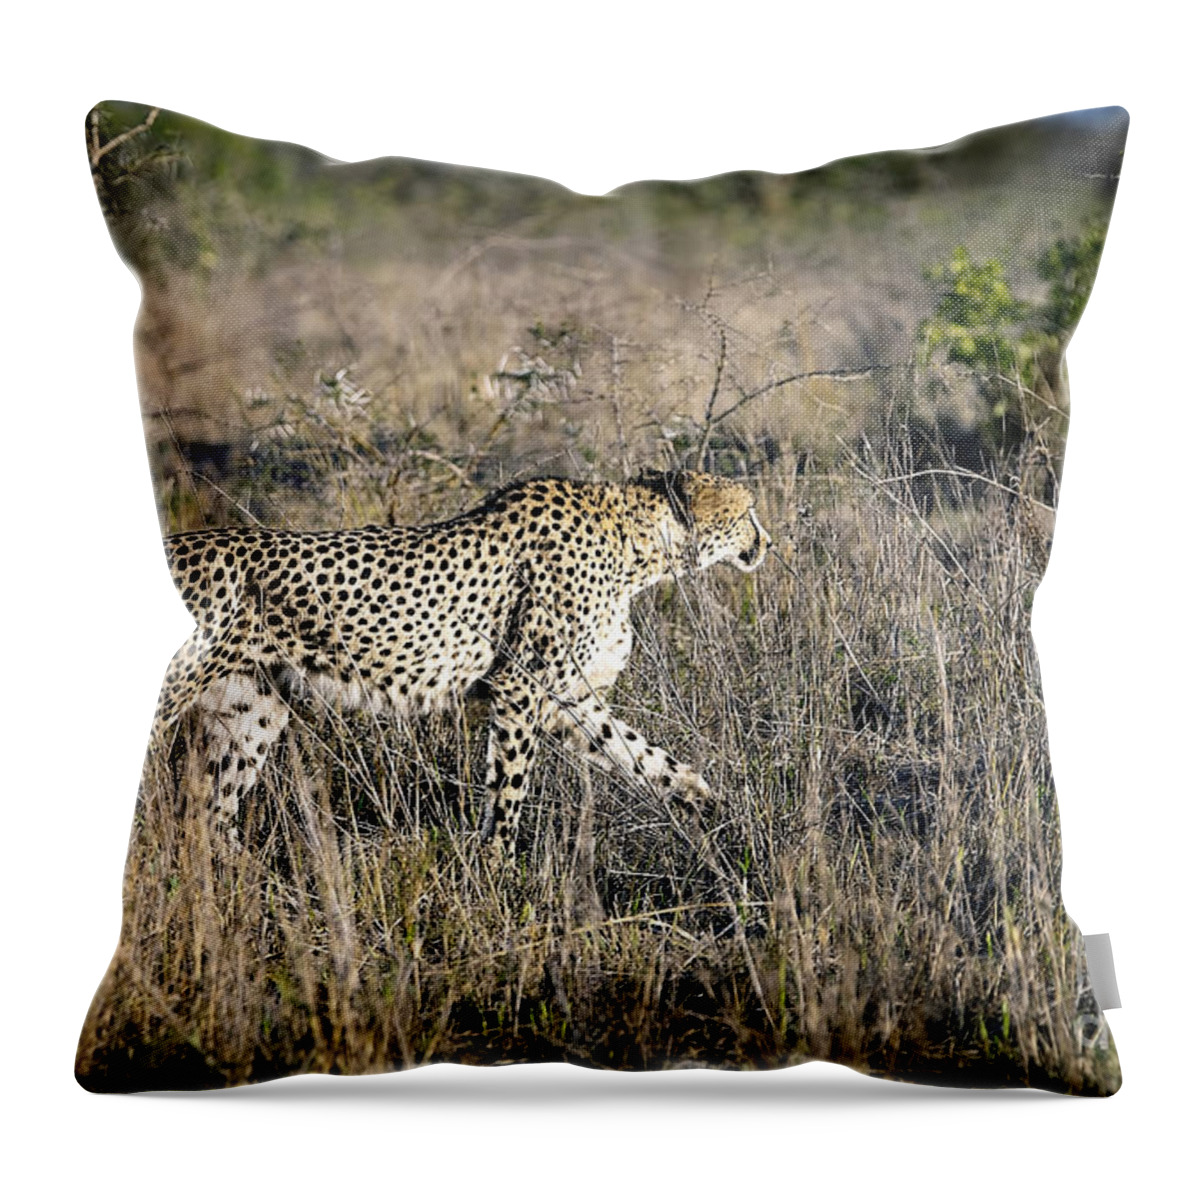 South Throw Pillow featuring the photograph 1100 Cheetah by Steve Sturgill